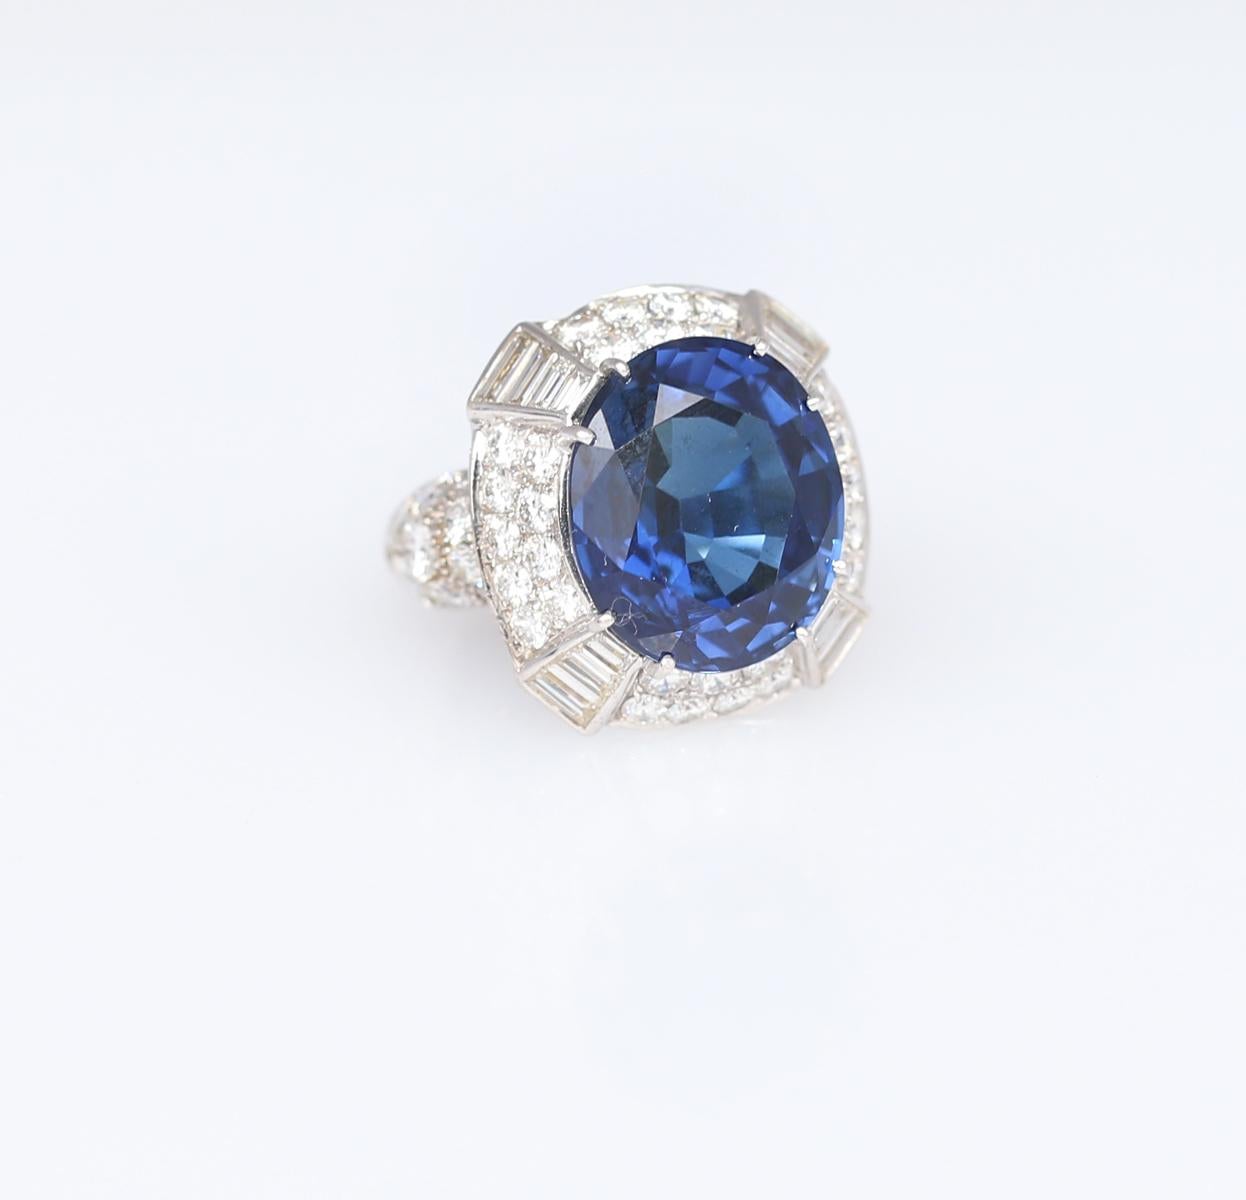 Women's 14.6 Ct Natural Sapphire Certified Diamond Ring 18K Gold, 1998 For Sale